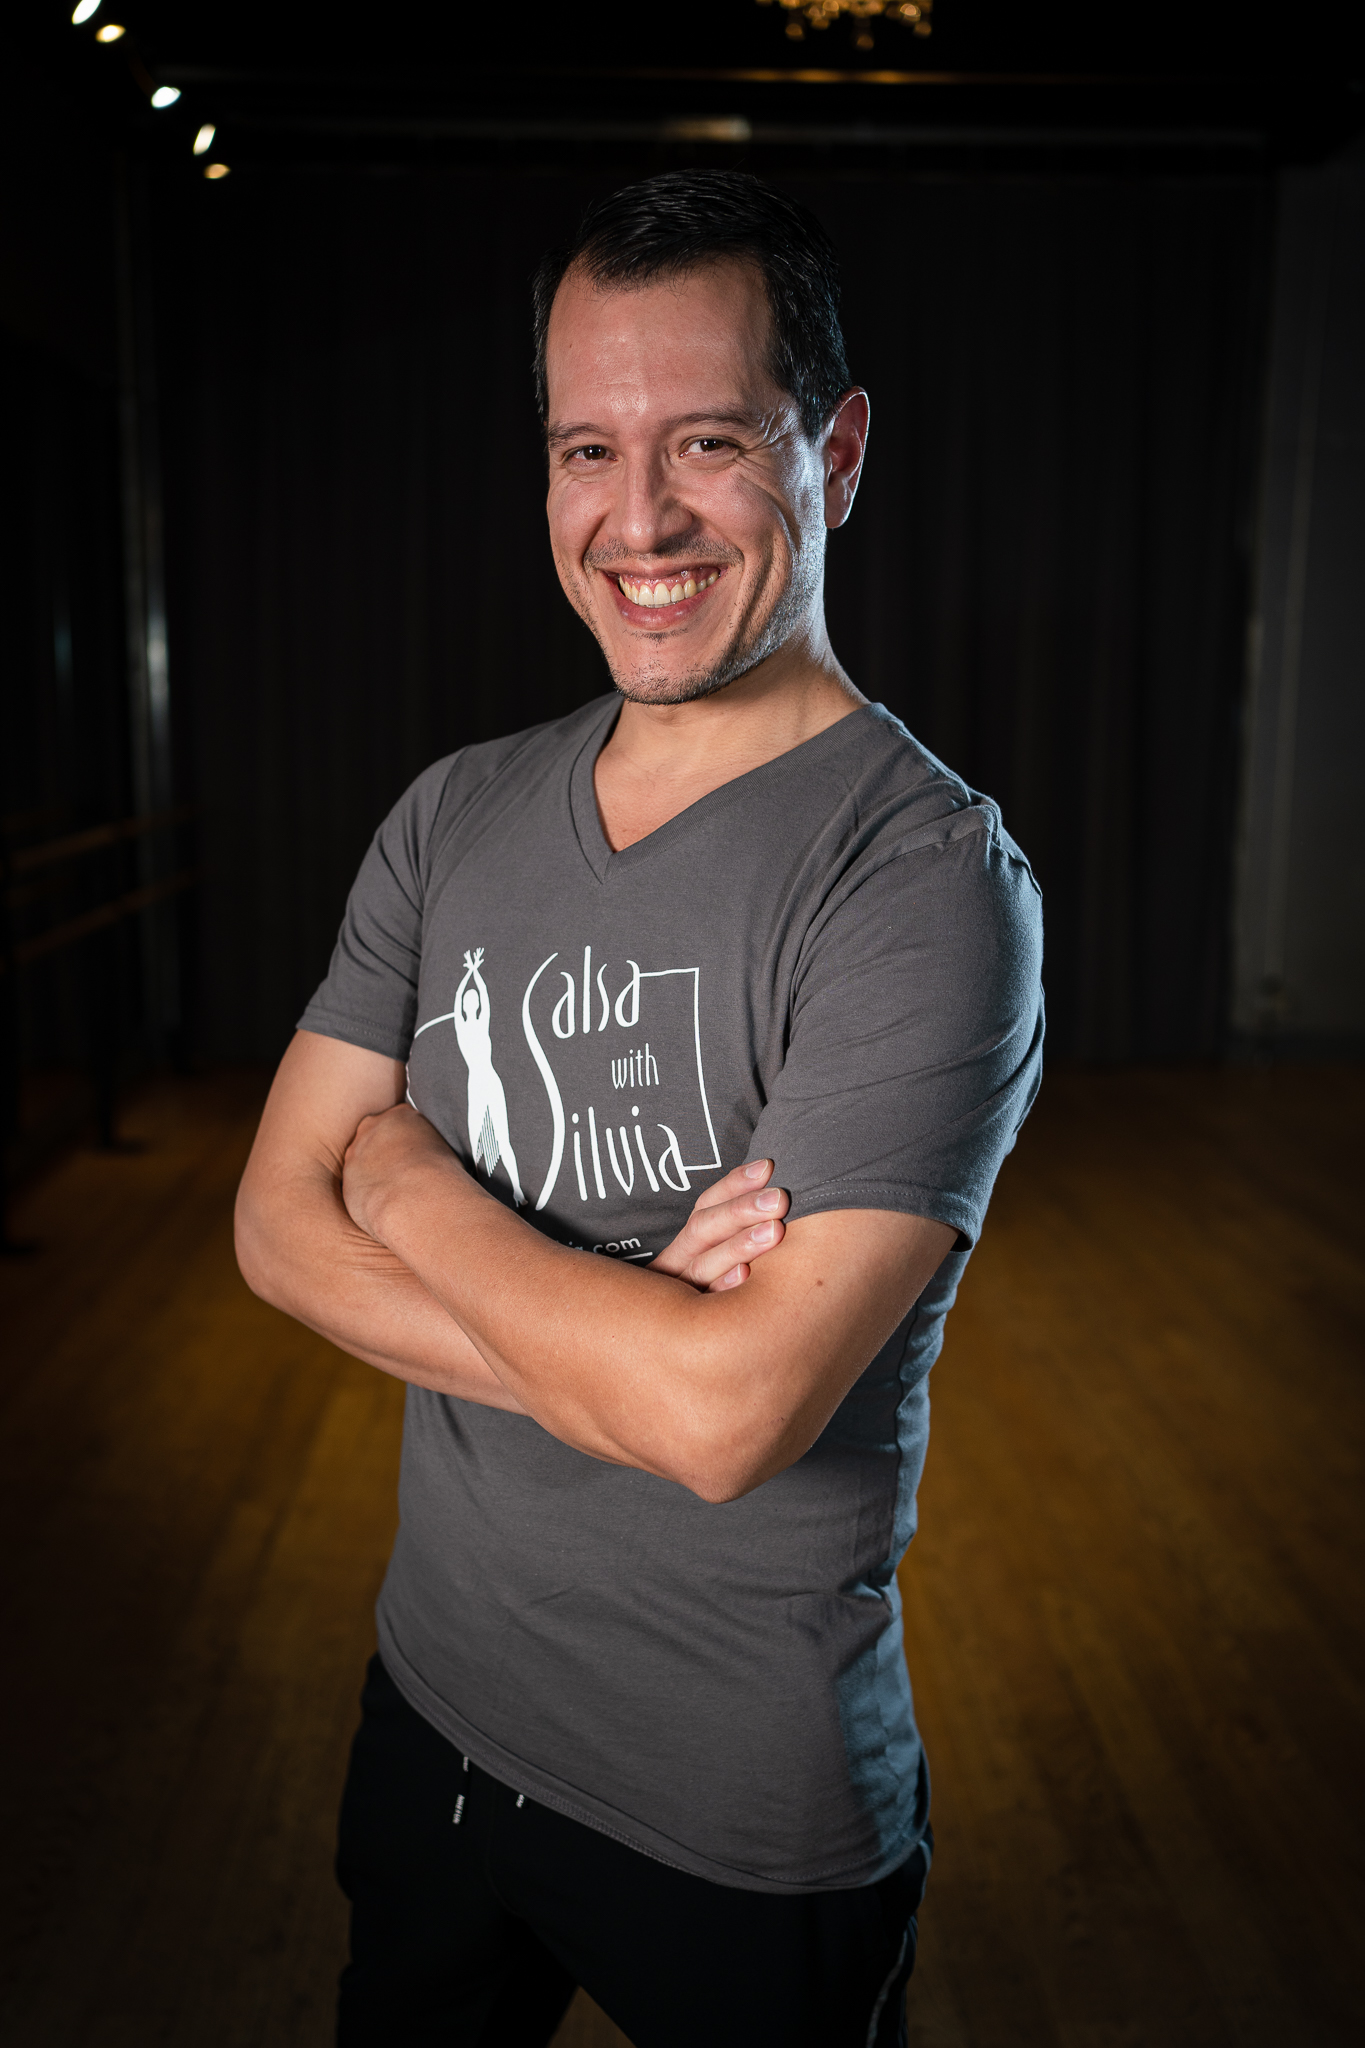 Roberto Gil - Salsa Dance Instructor at the Salsa With Silvia dance studio in DC and Bethesda